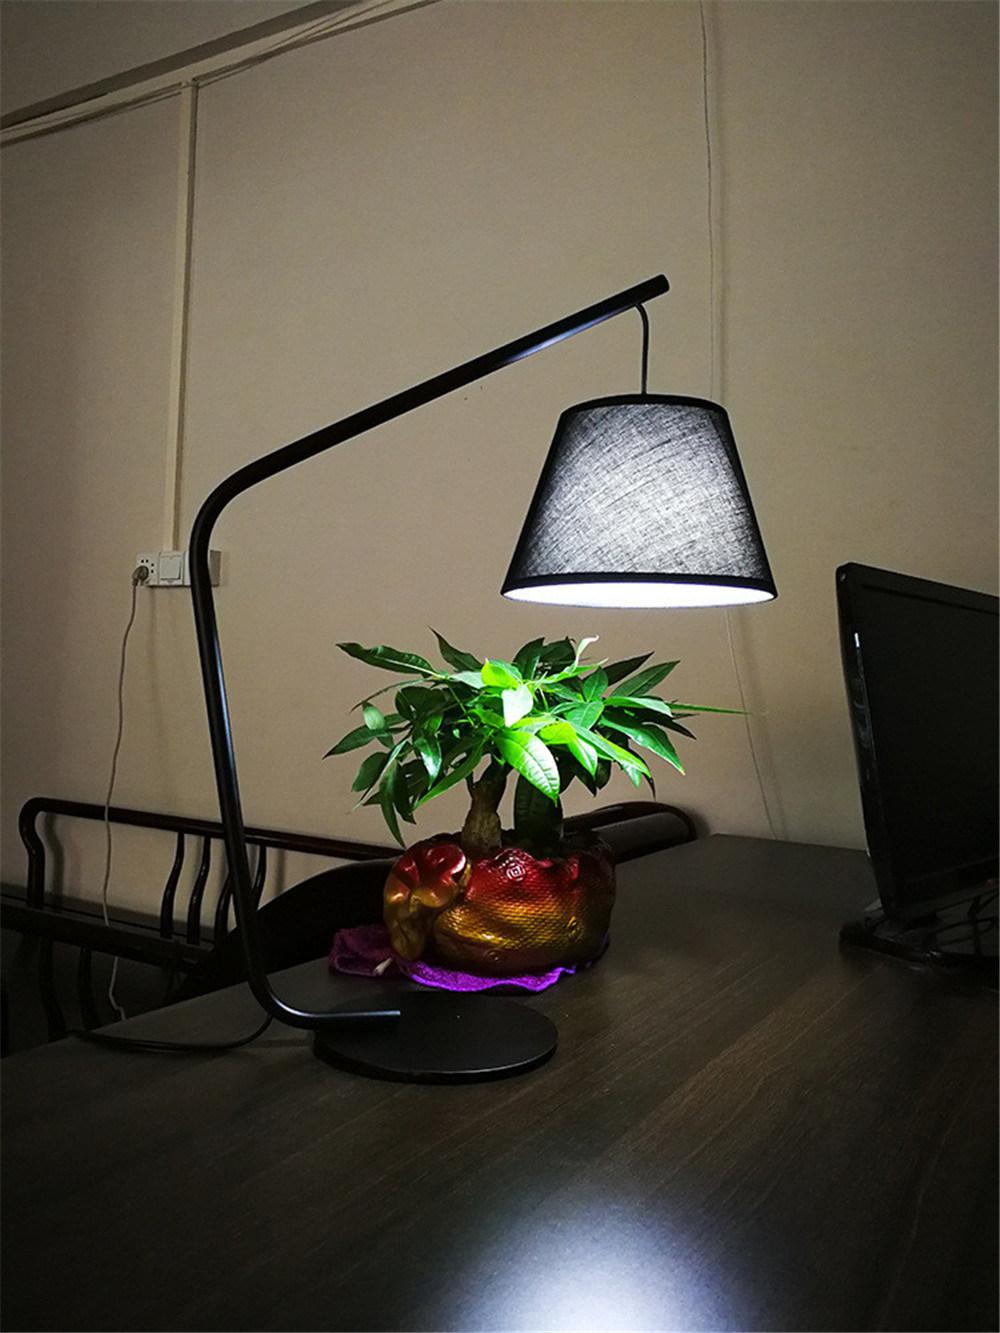 Table Lamp Living Room Table Lamp Wrought Iron Cloth Bedroom Bedside Lamp Danish Fishing Lamp